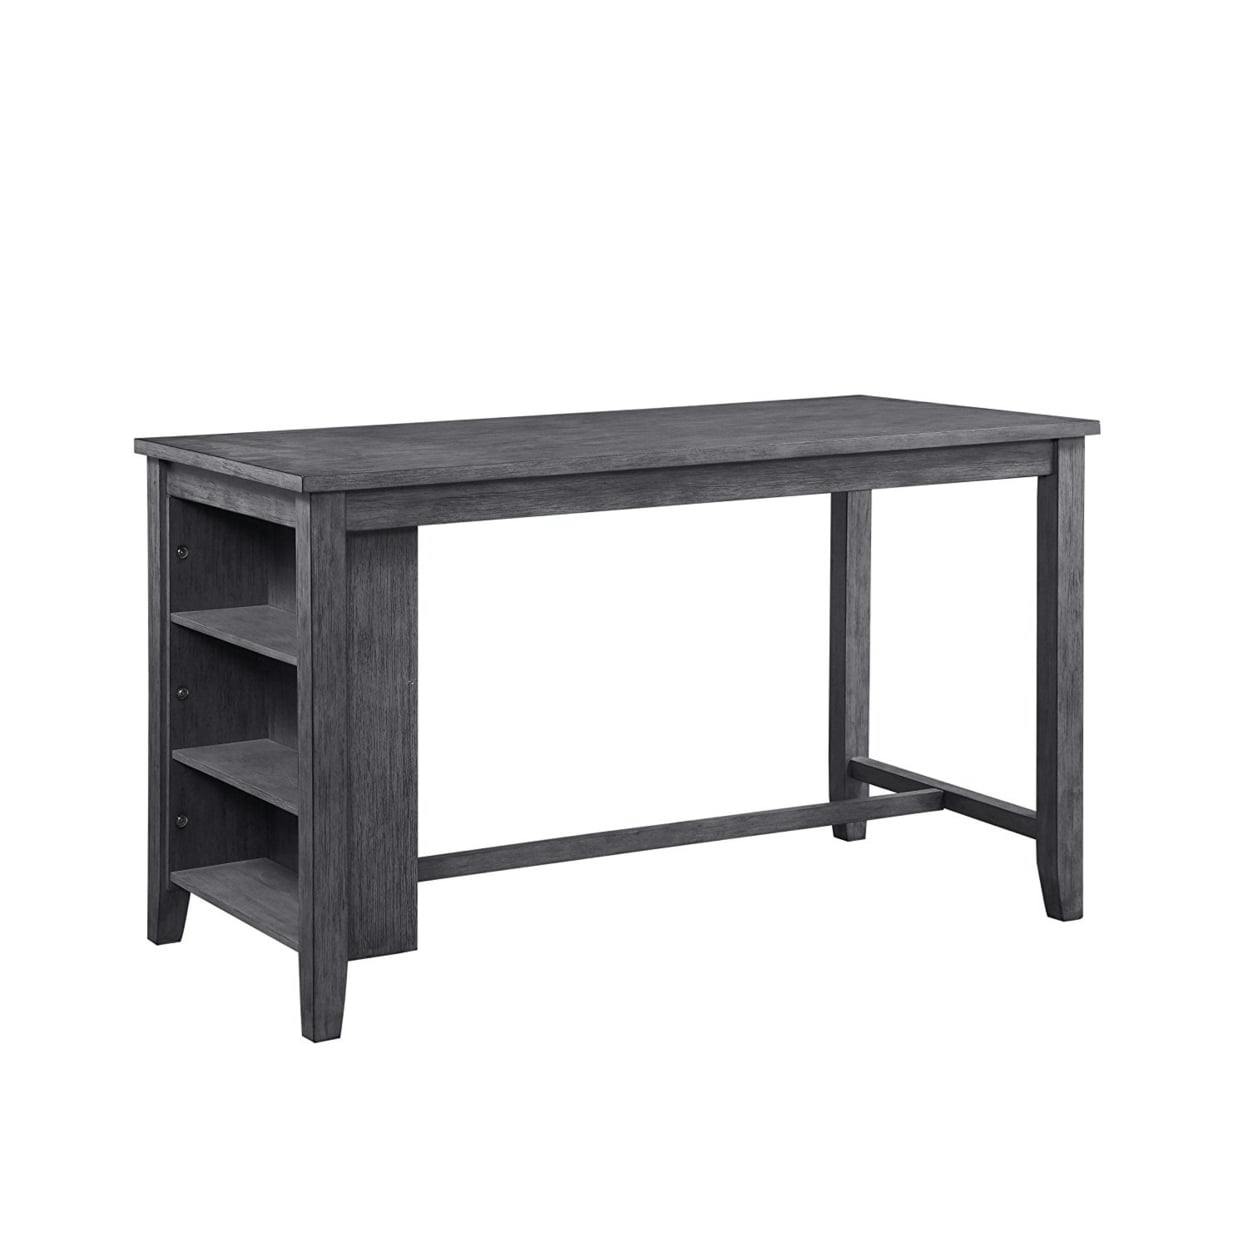 Transitional Gray Solid Hardwood Counter Height Dining Table with Storage